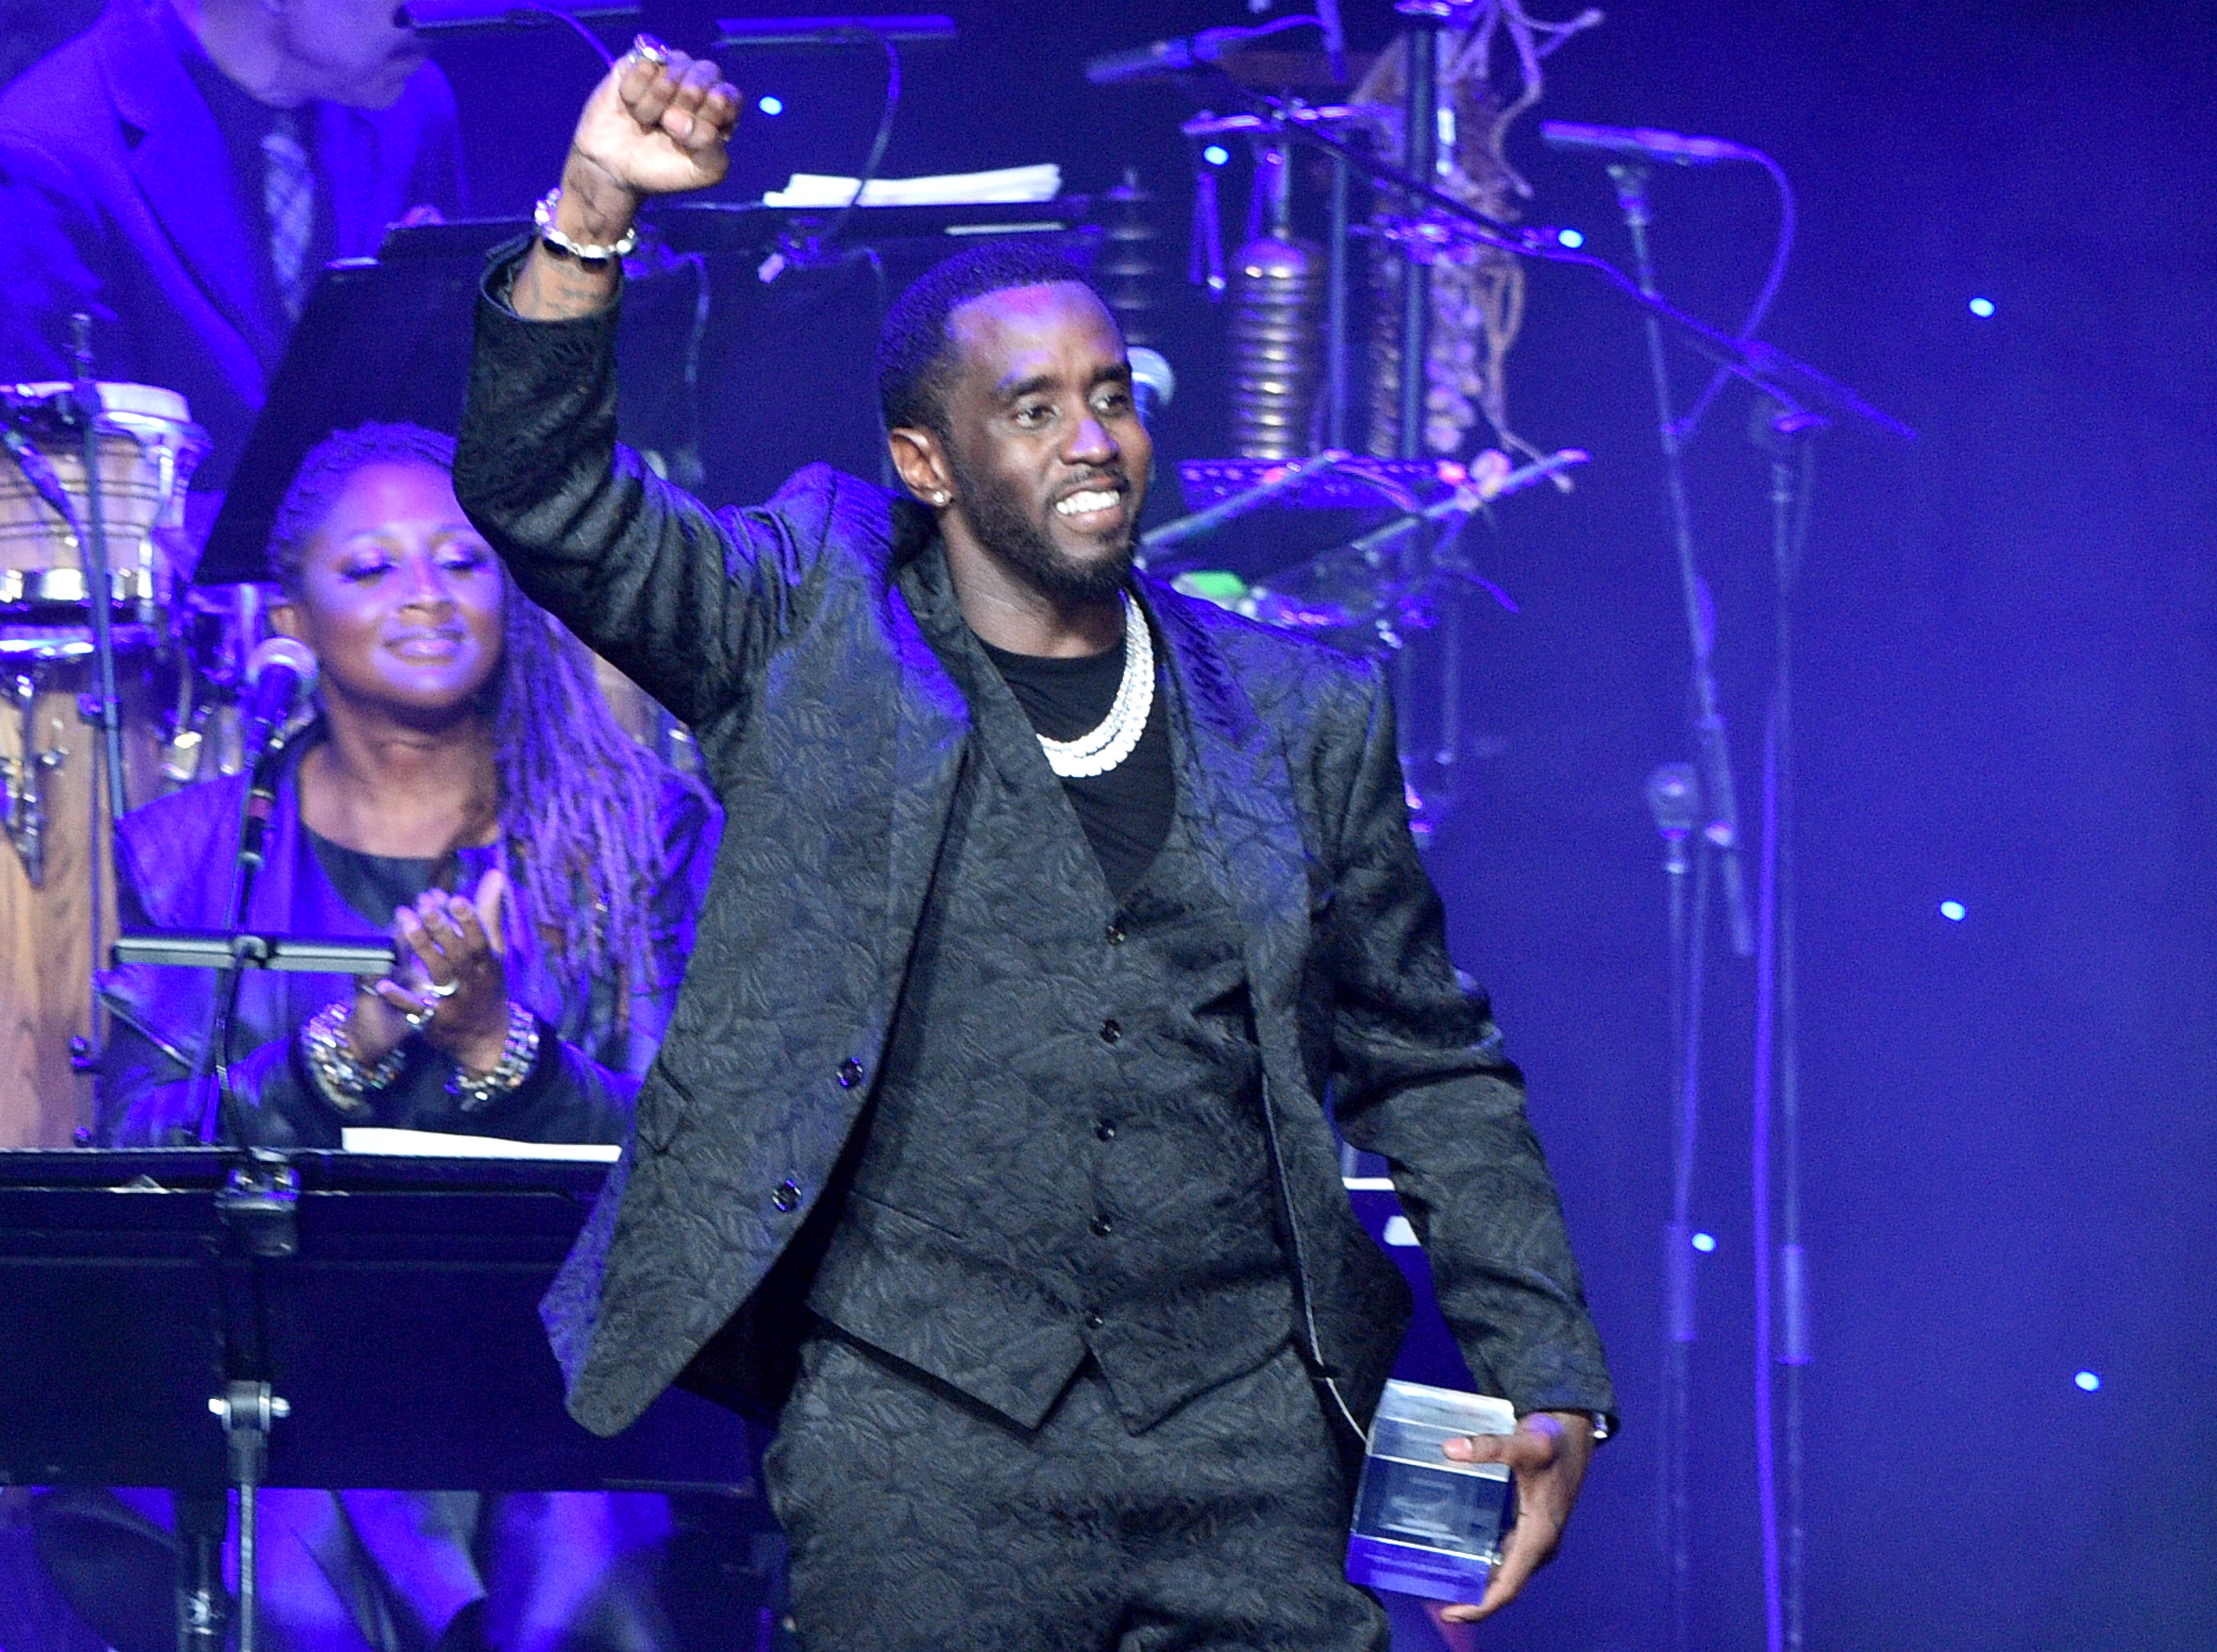 Sean “Diddy” Combs has called out GM and others for failing to support black businesses